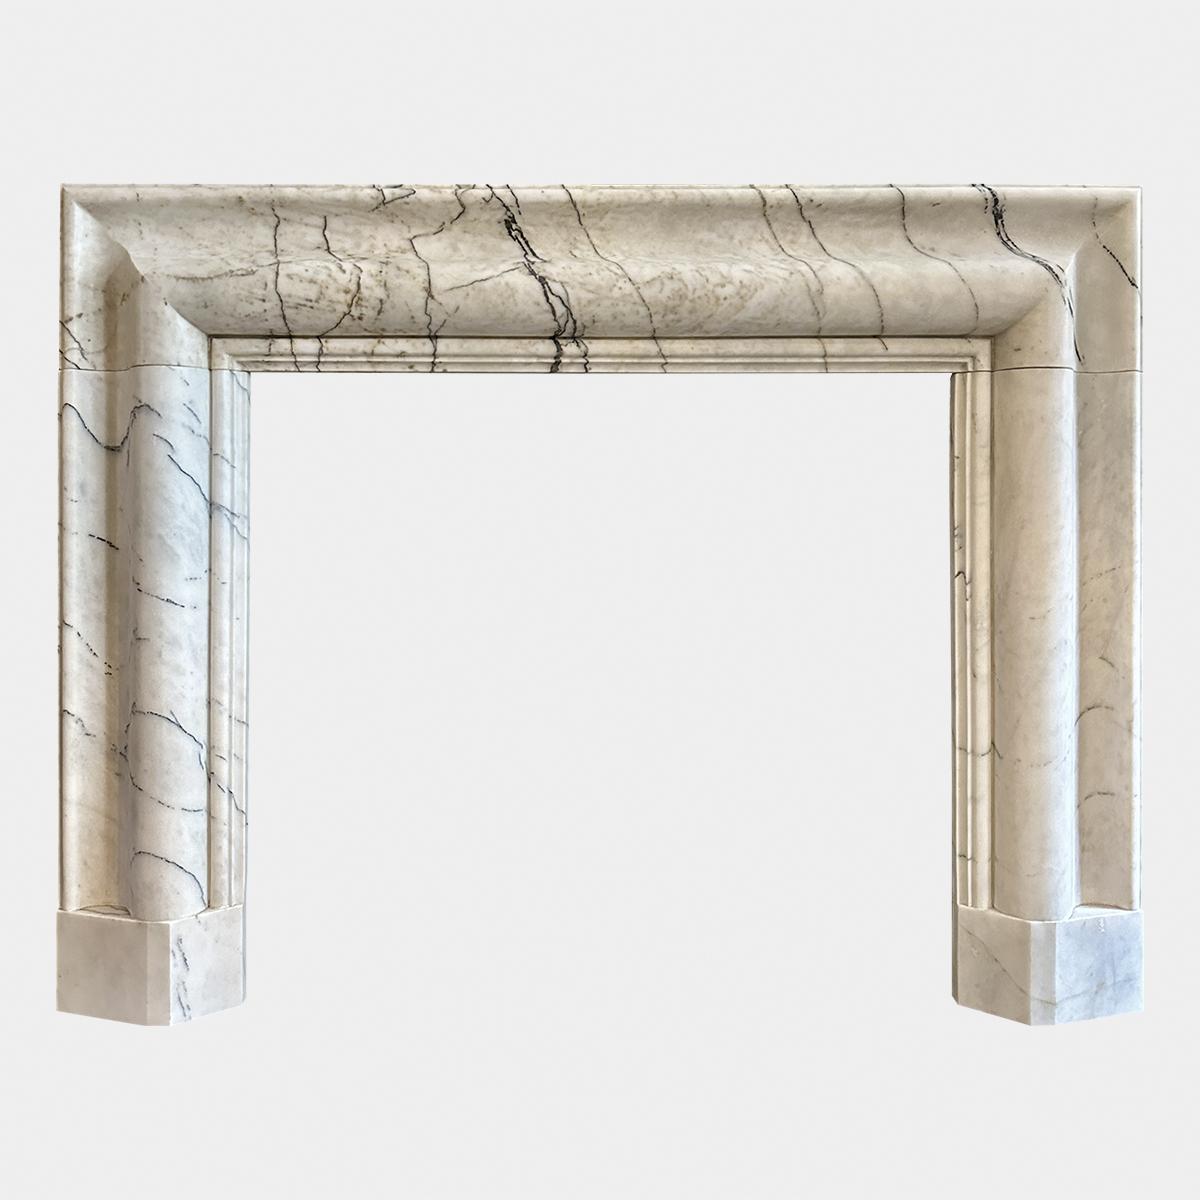 A large substantial Bolection fireplace in a Variant of Carrara marble known as Calacatta Vagli. Generous mouldings giving a wide frame and header with carved inner slip. Stood on shaped foot blocks. Good quality surround made in superior Italian